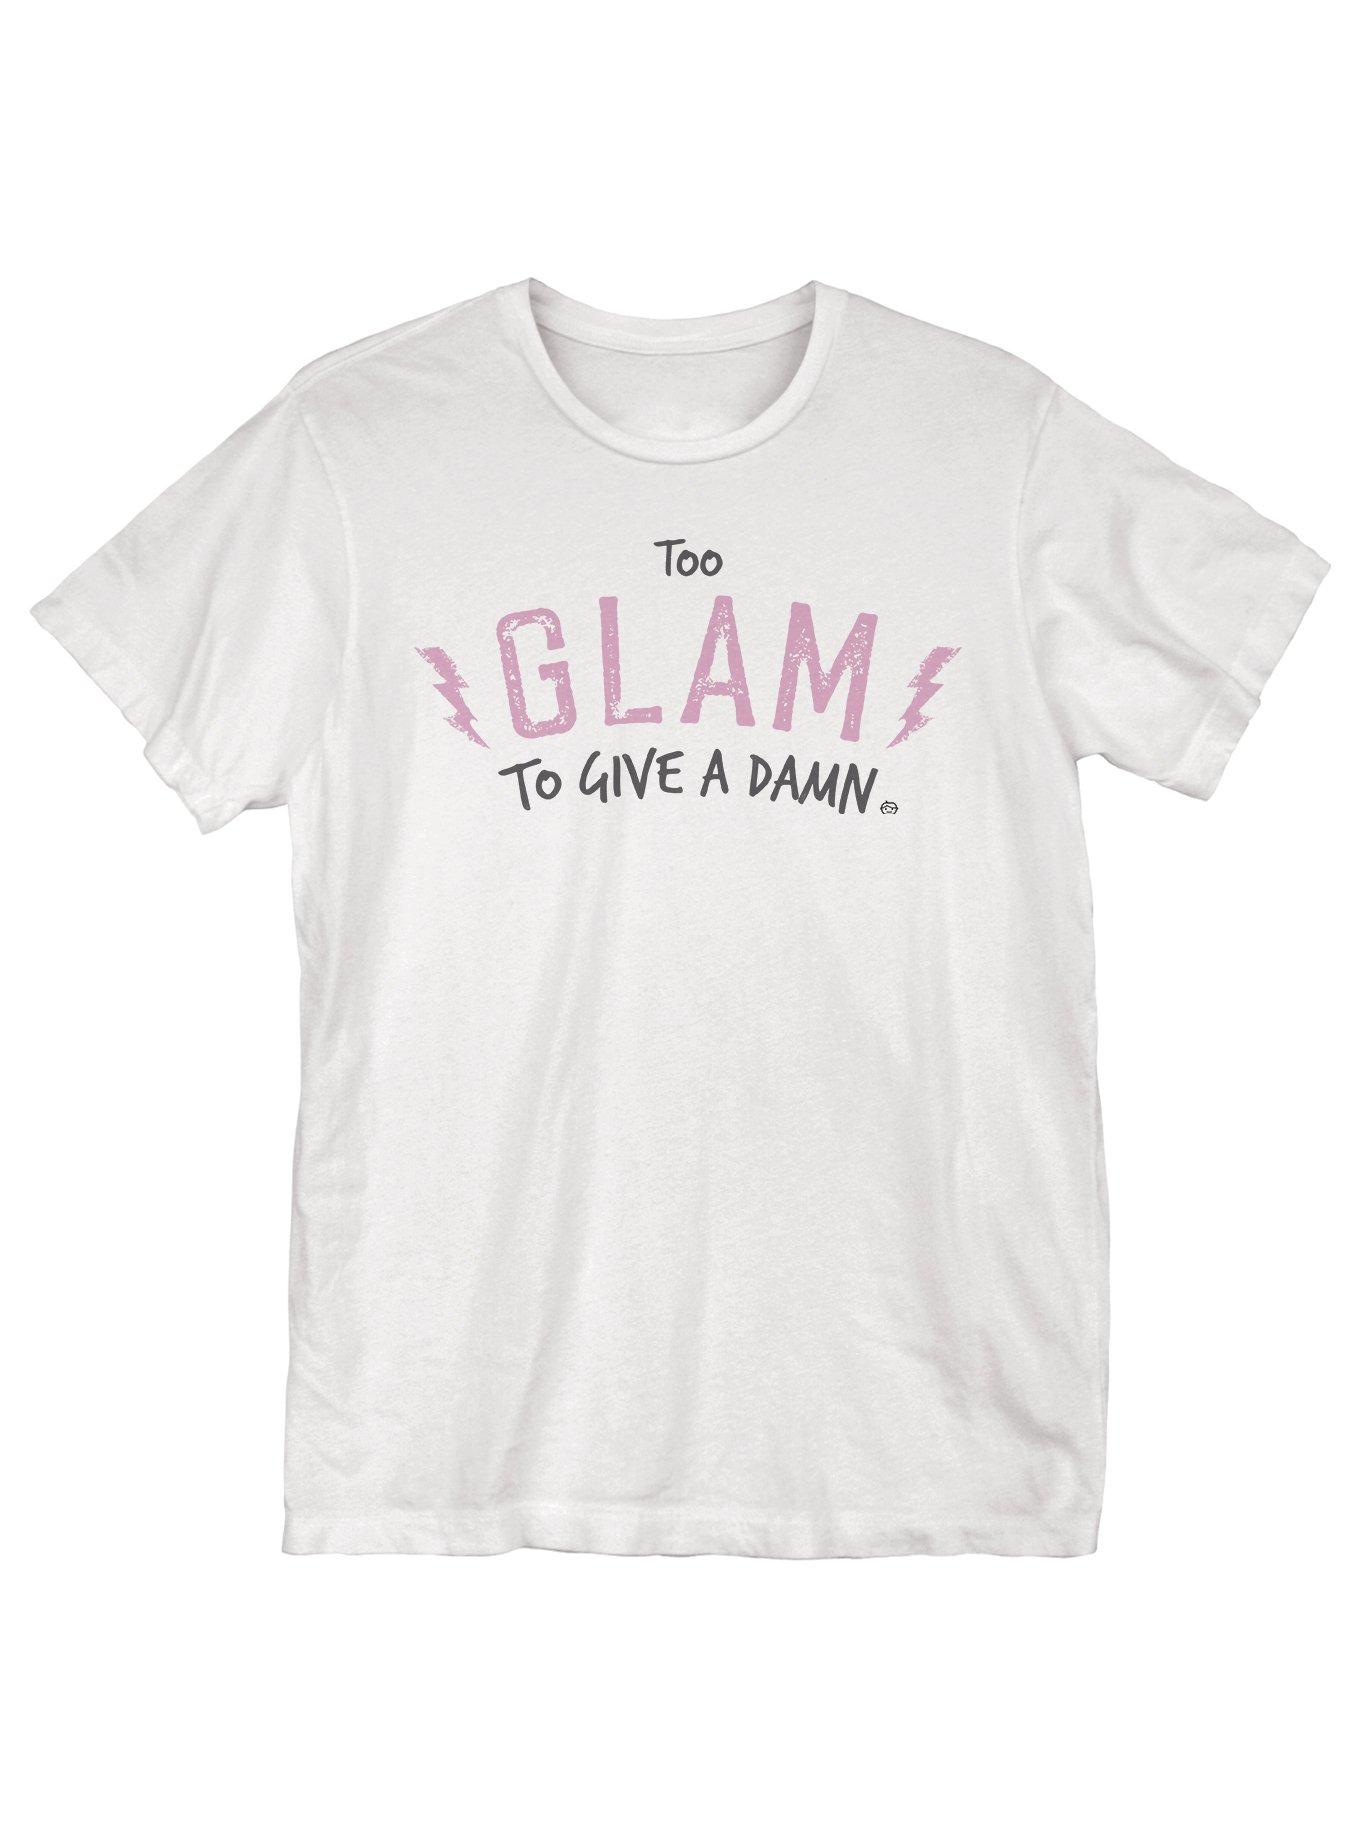 Too Glam T-Shirt